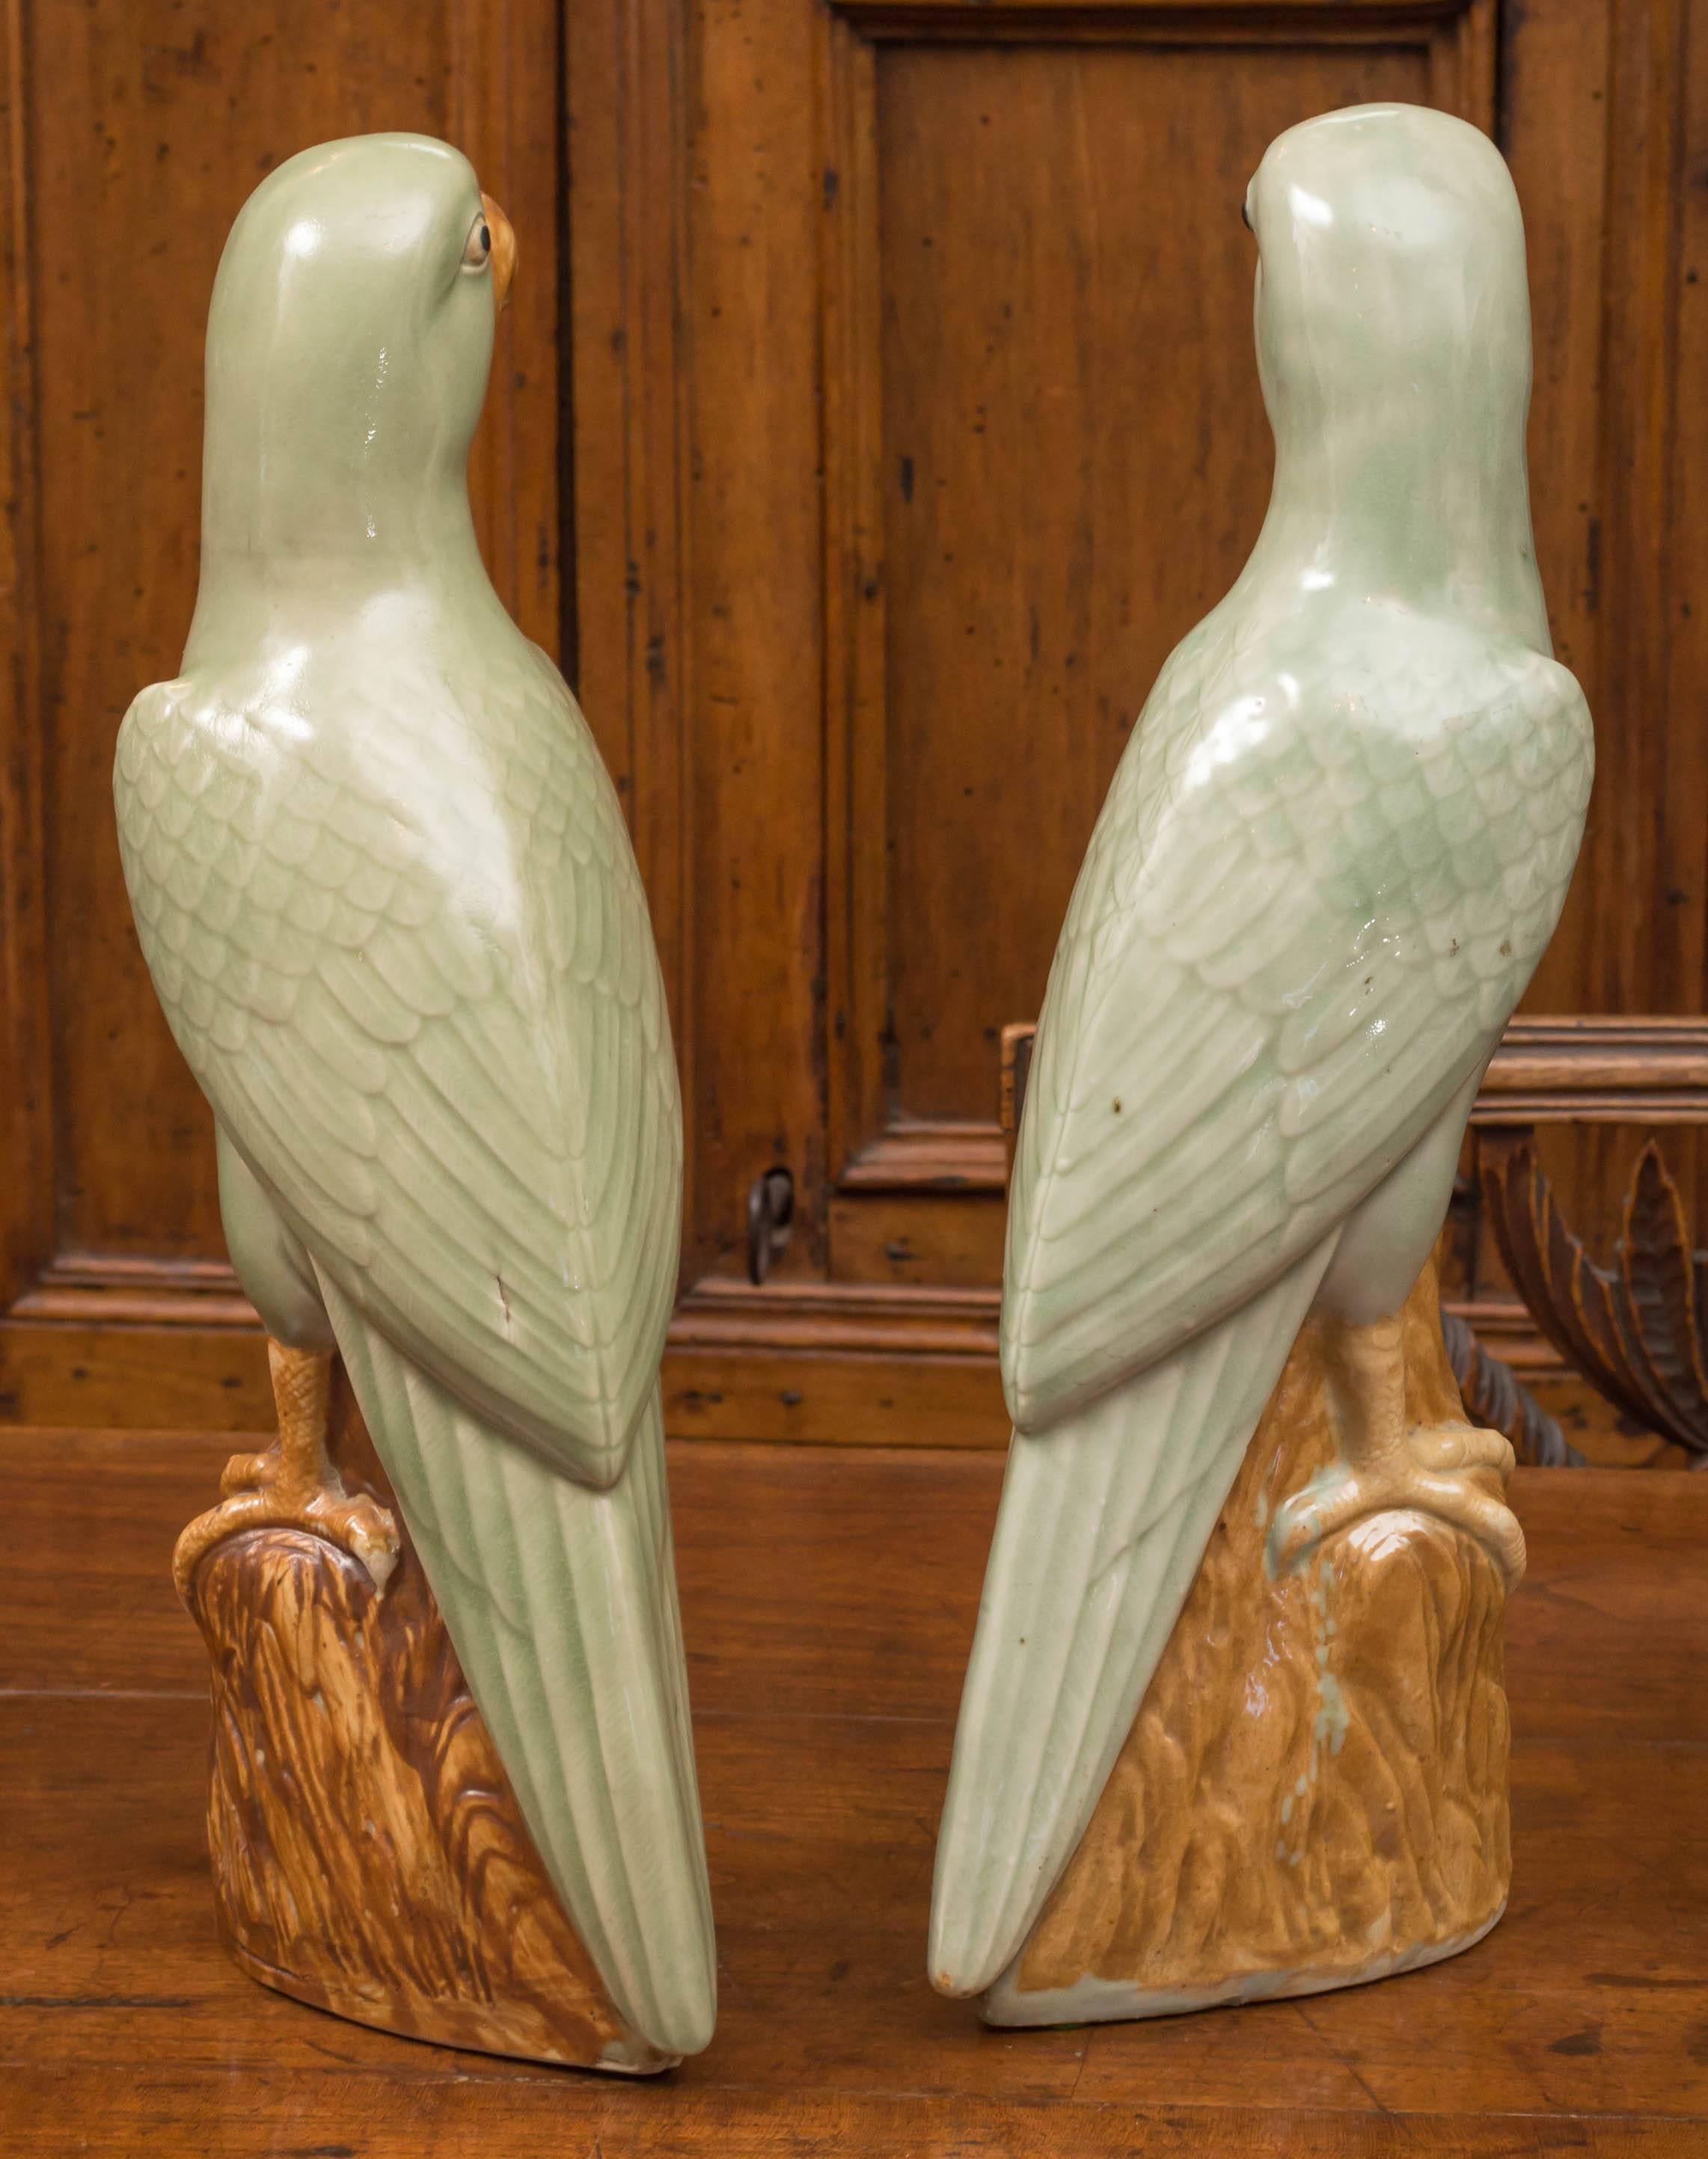 Glazed Pair of Chinese Porcelain Celadon and Brown Glaze Parrots, circa 1920